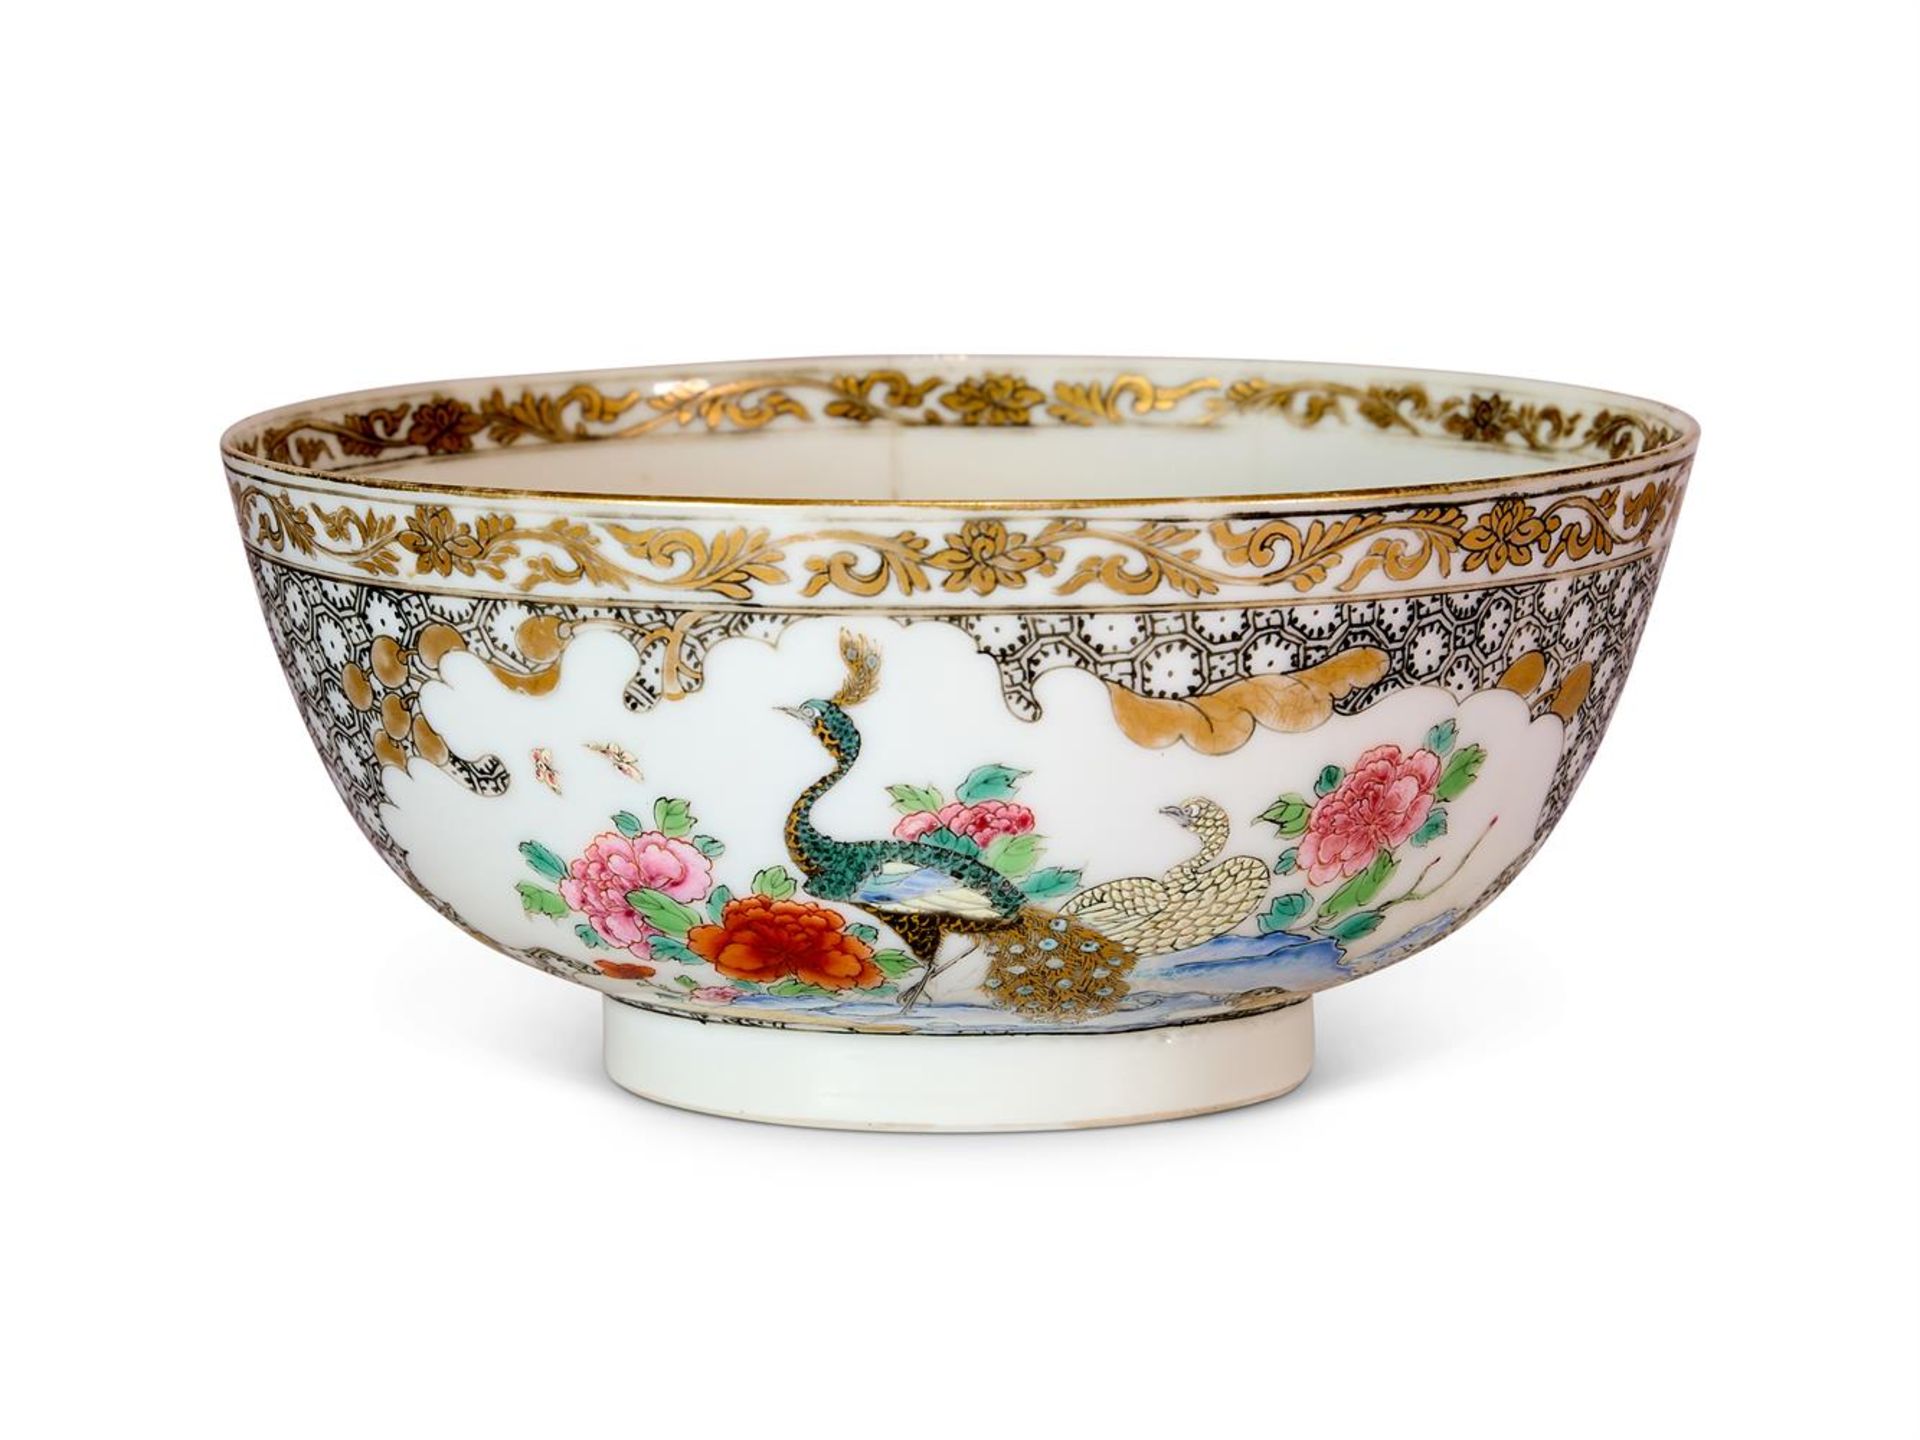 A CHINESE FAMILLE ROSE BOWL, QING DYNASTY